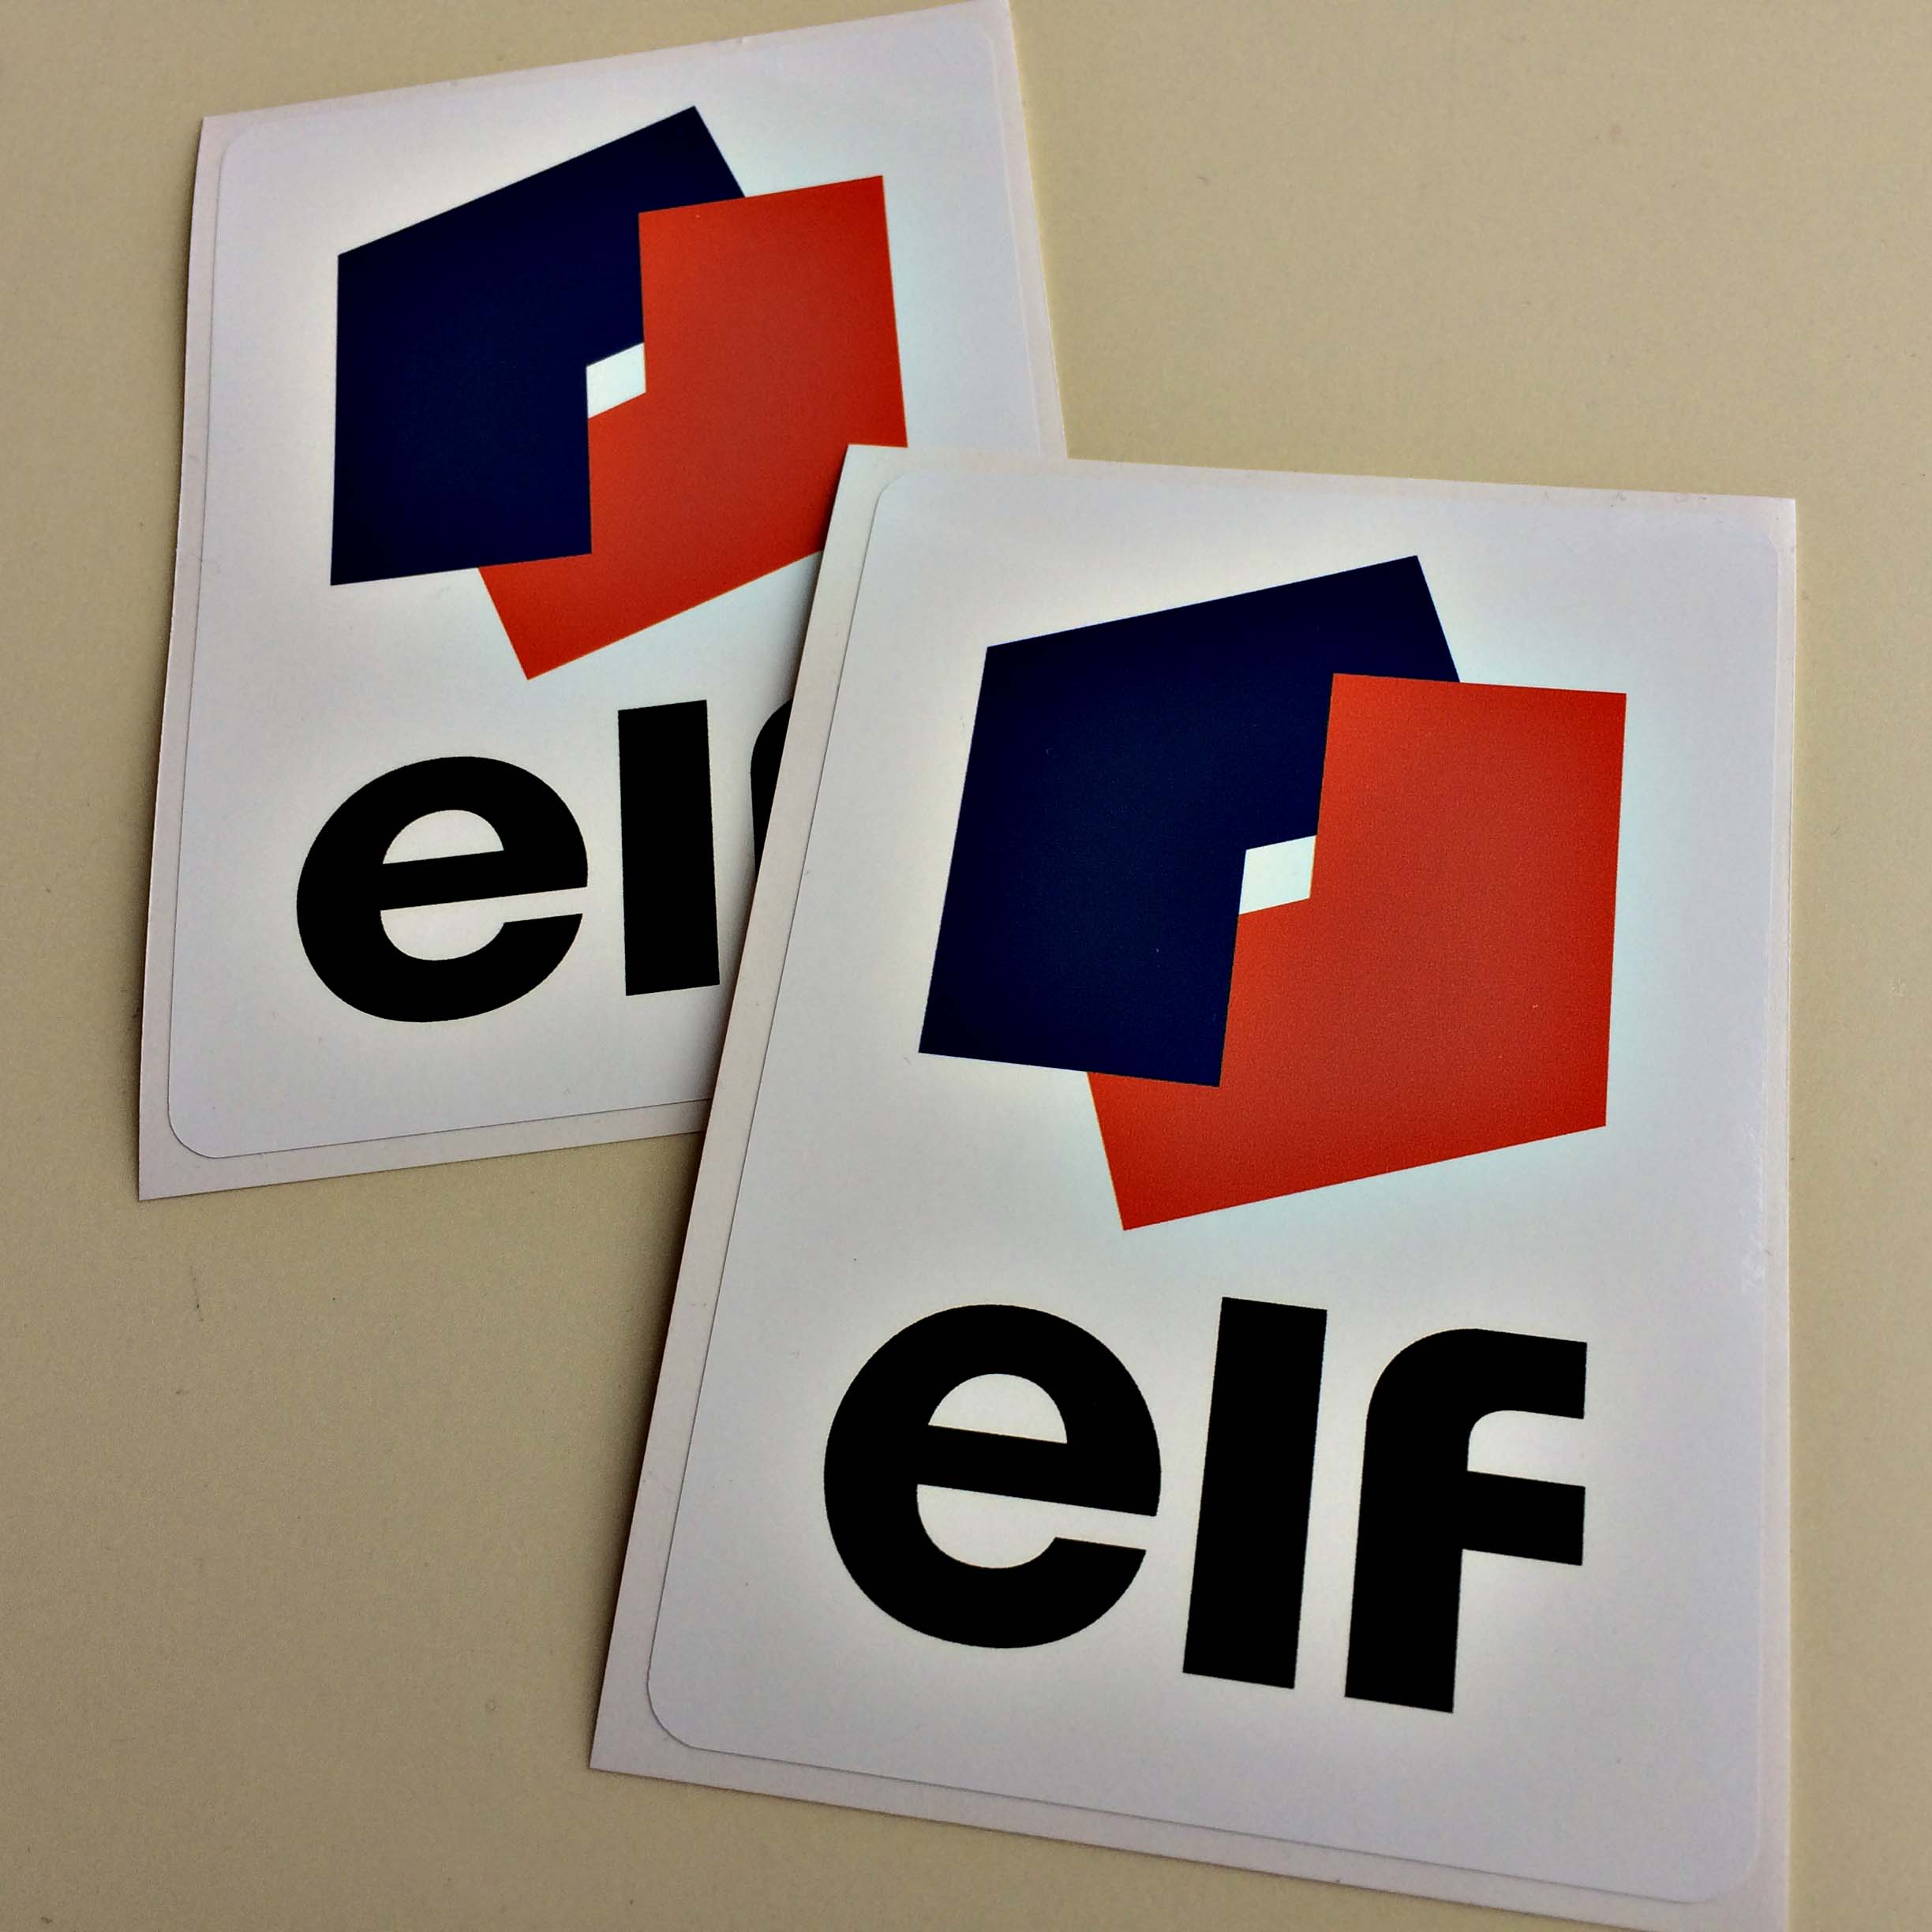 ELF RALLY STICKERS logo; two interlocking L shapes in blue and red on a white sticker with Elf in bold black lowercase lettering below.